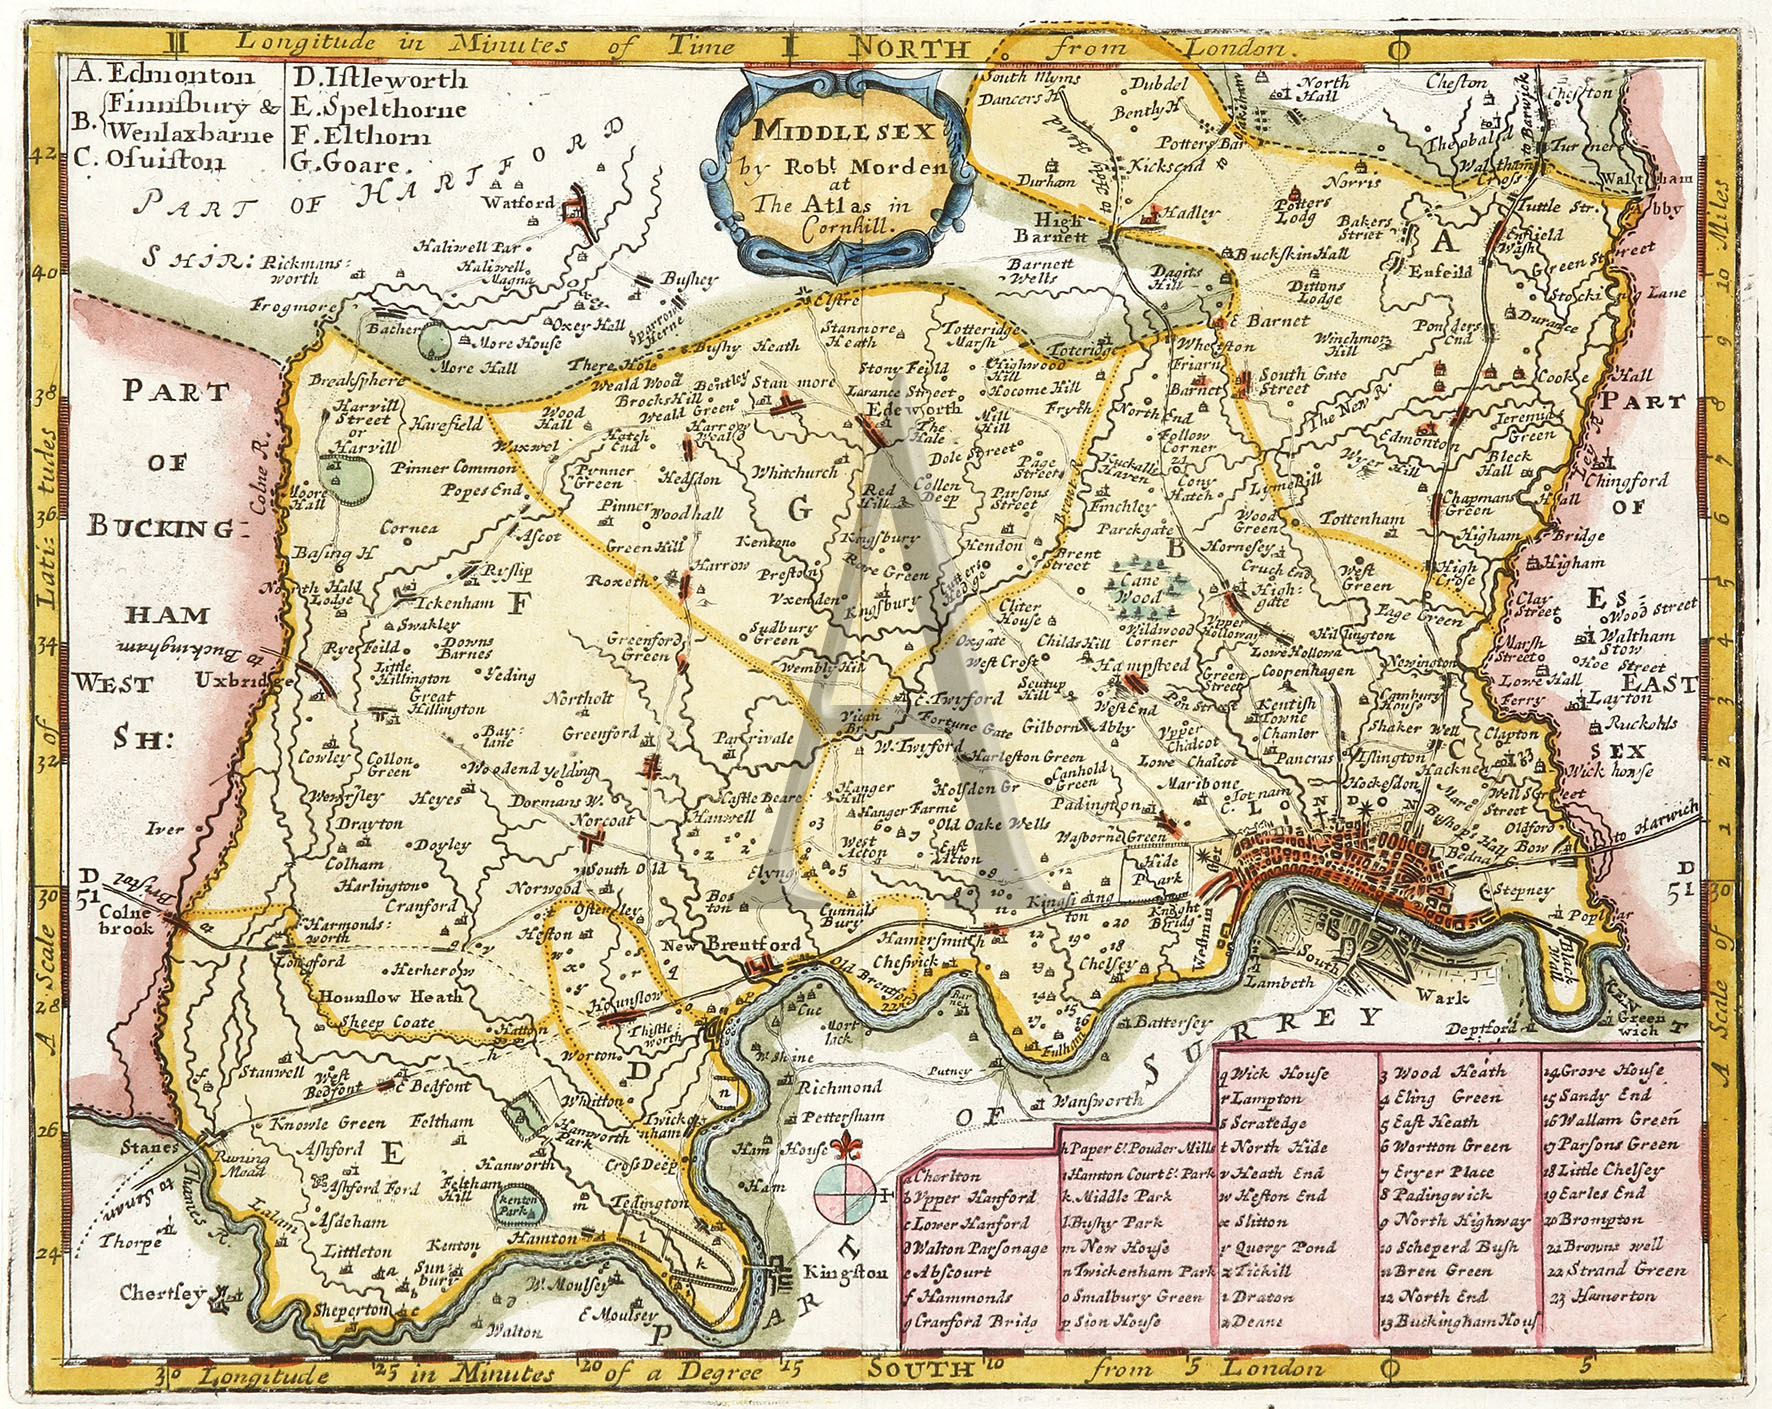 Middlesex - Antique Print from 1701